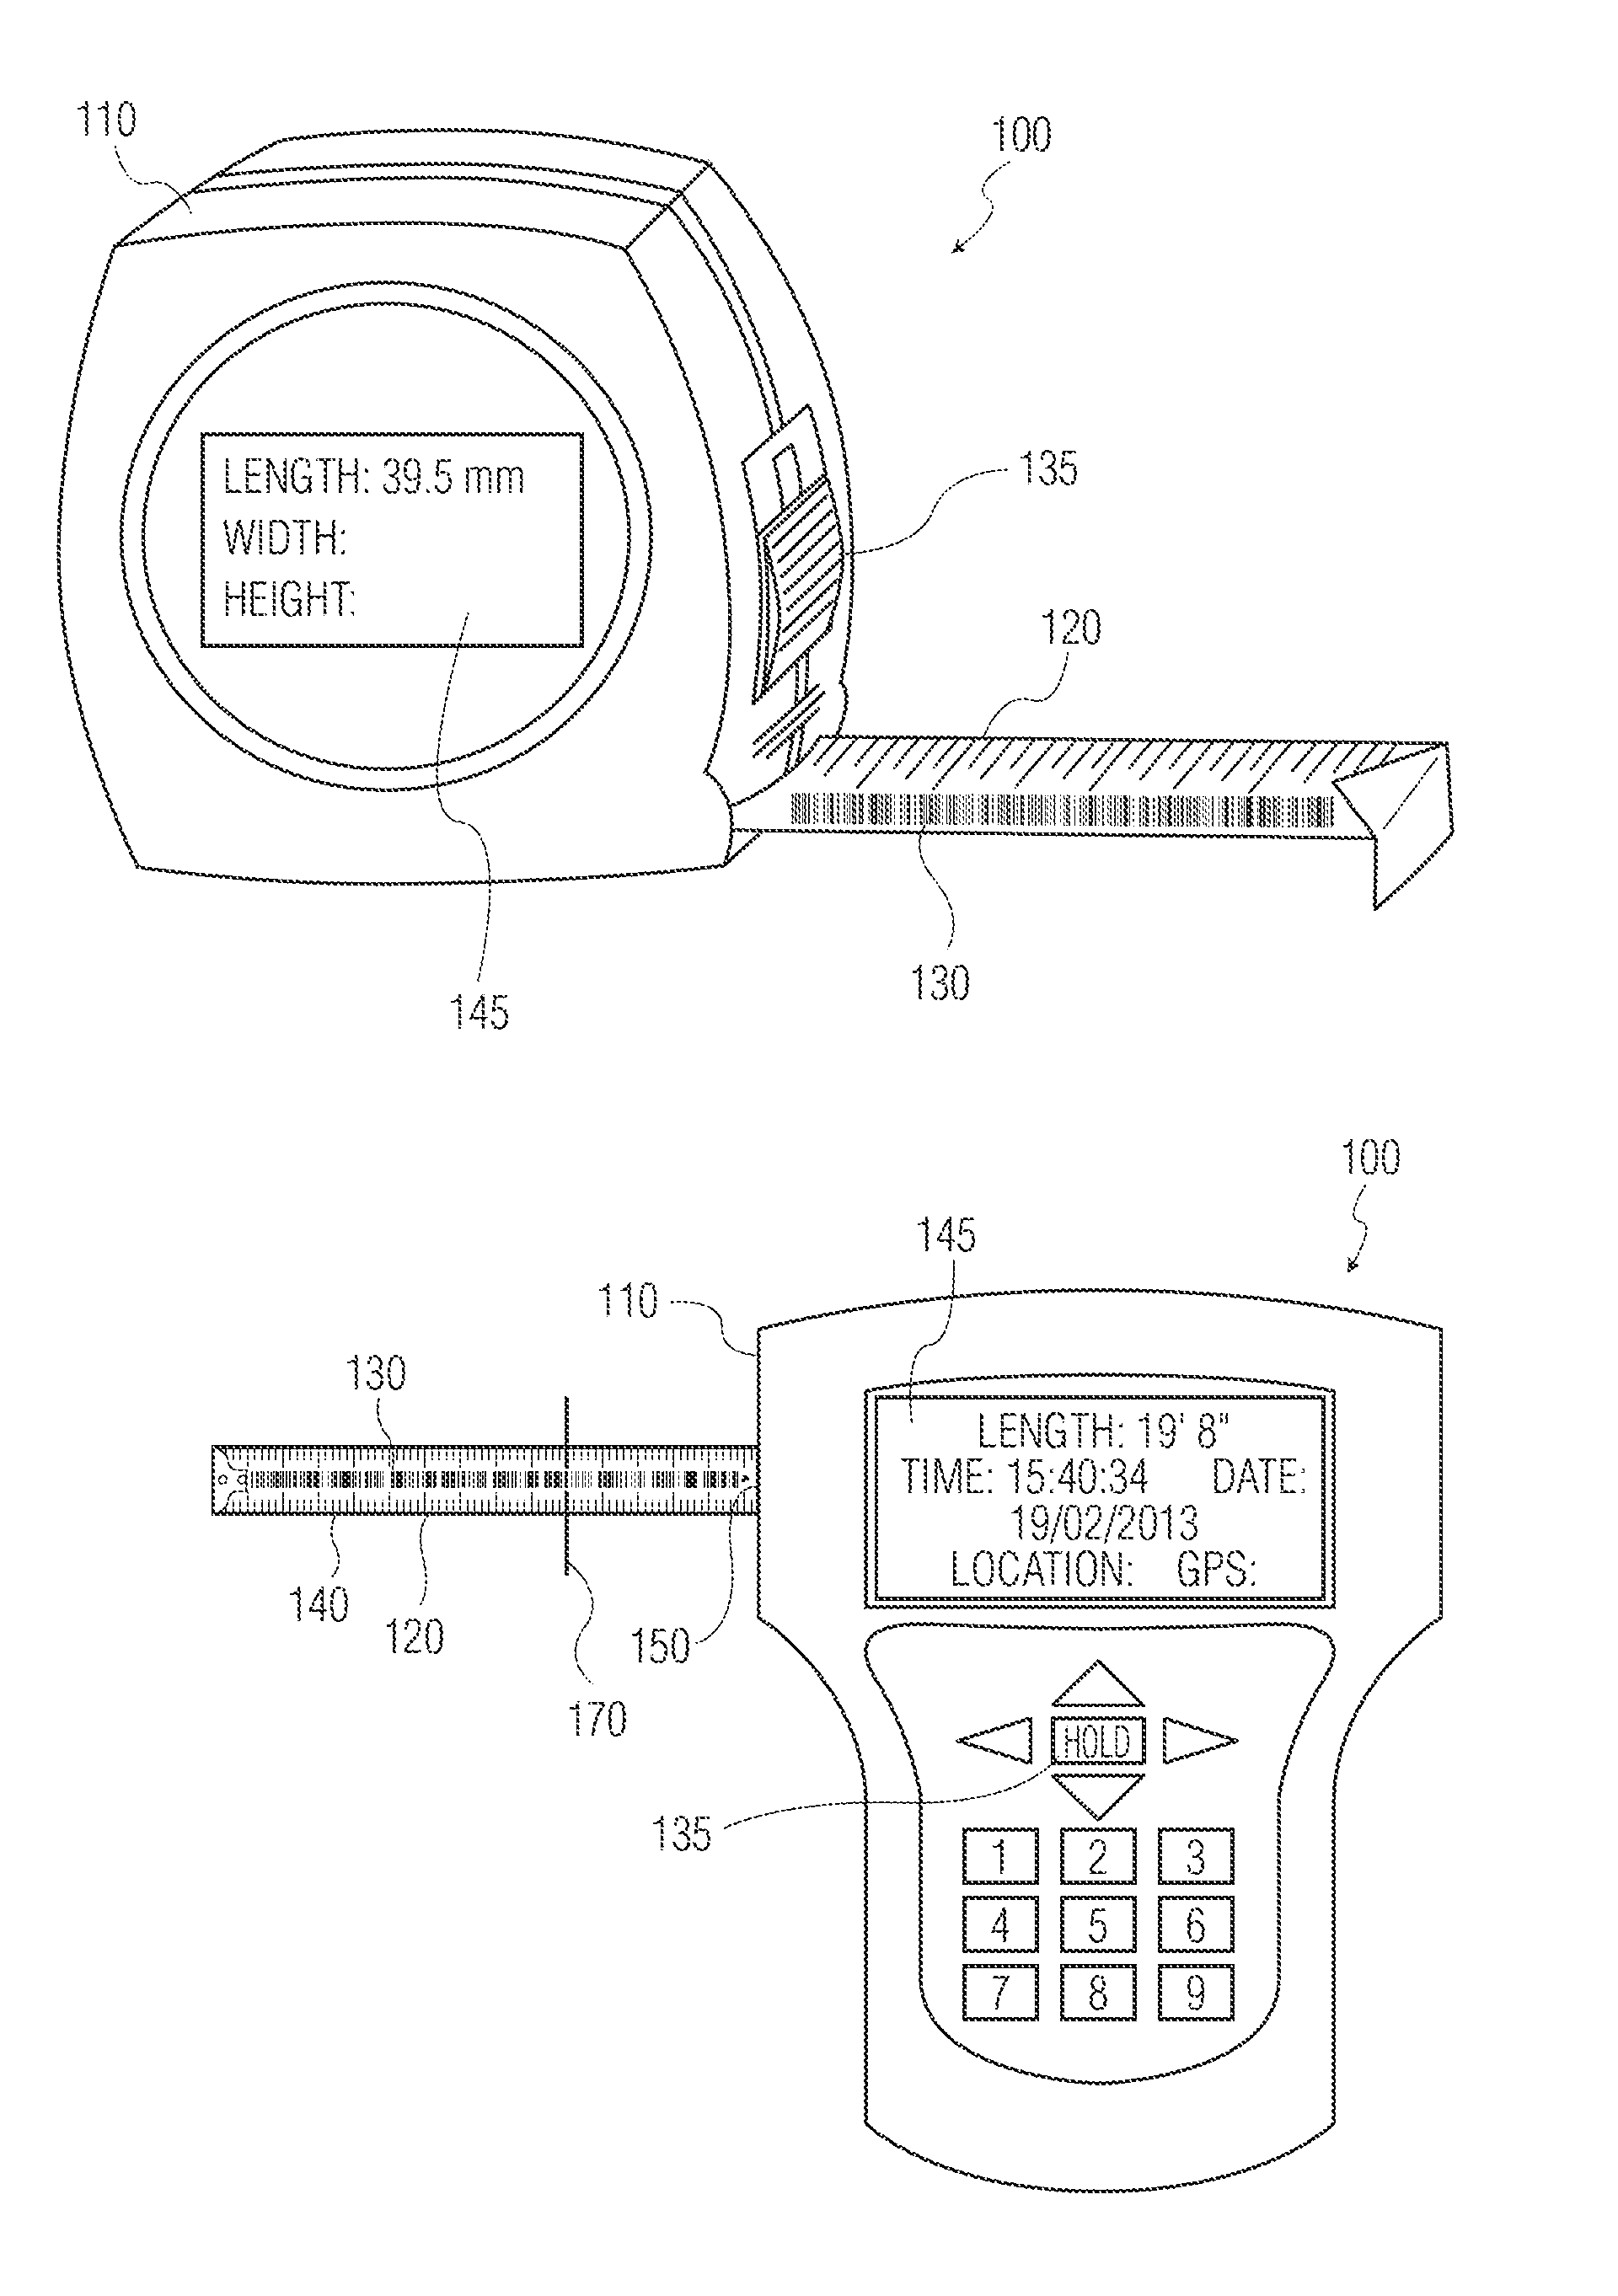 Self-Reading Measuring Device, System and Method